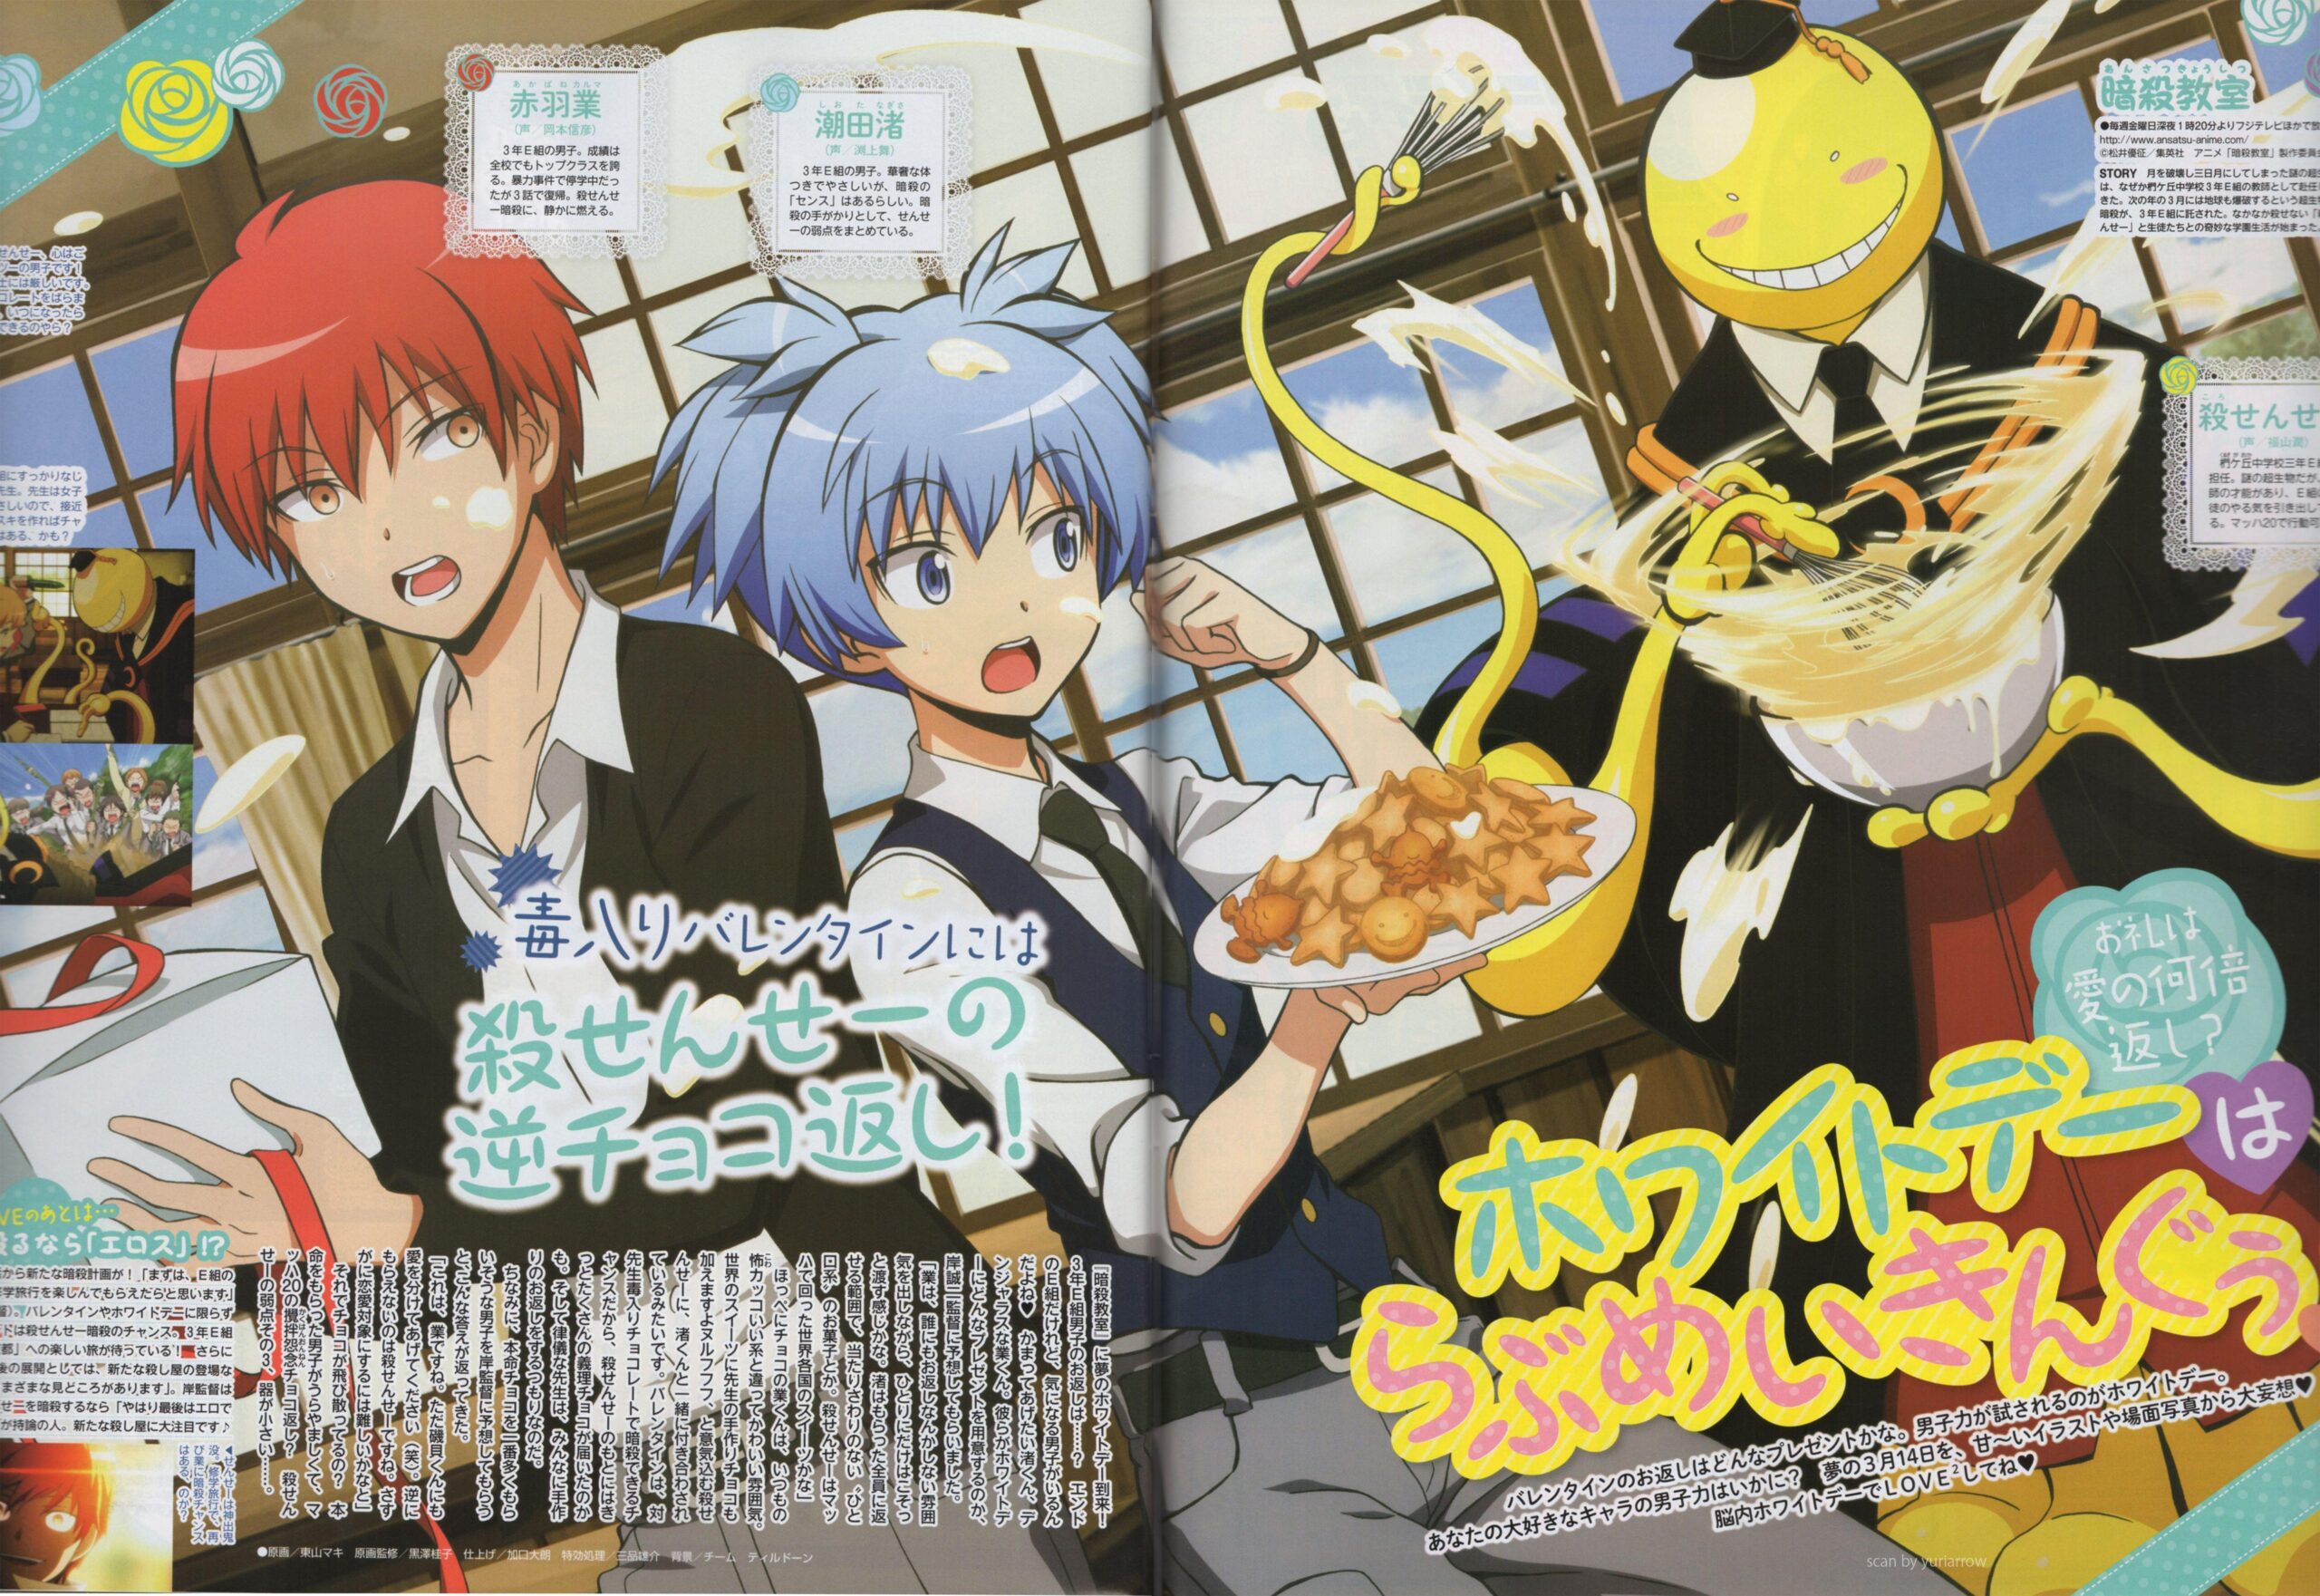 Assassination Classroom Wallpapers For Free, Assassination Classroom, Anime